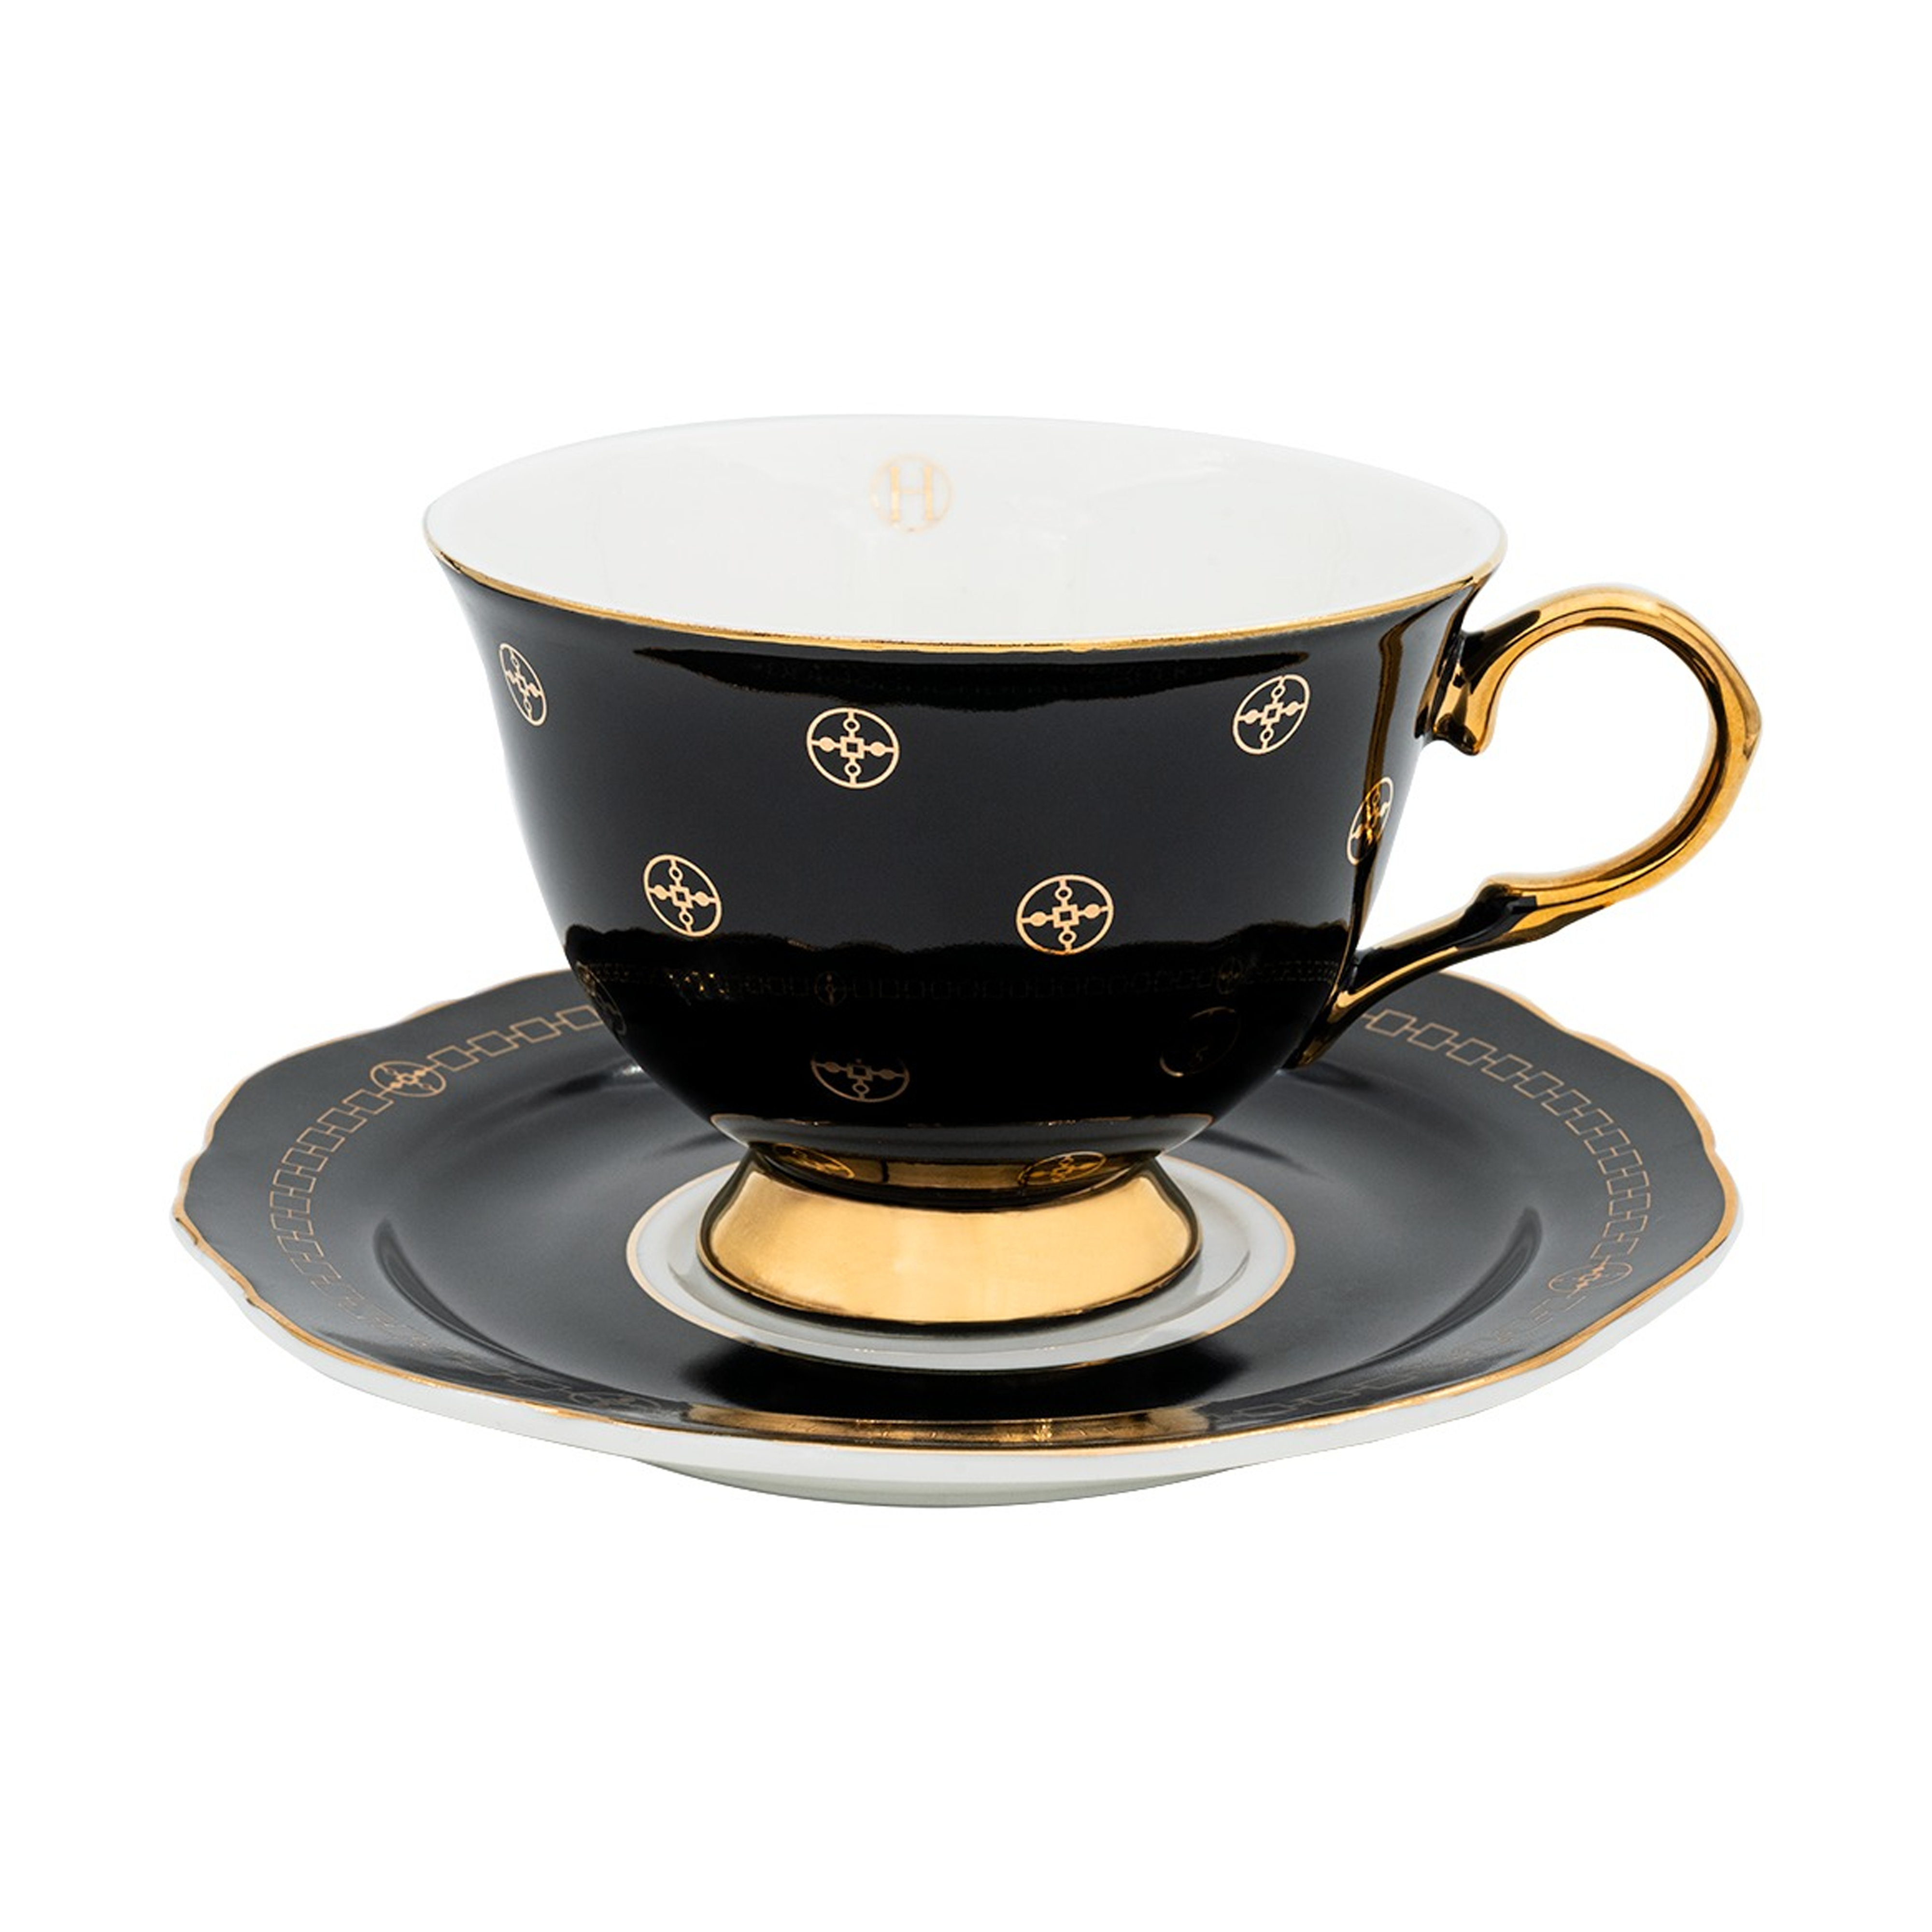 https://www.nordicnest.com/assets/blobs/hilke-collection-anima-gemella-nero-cup-with-saucer-22-cl/578798-01_1_ProductImageMain-8dd0c089c1.png